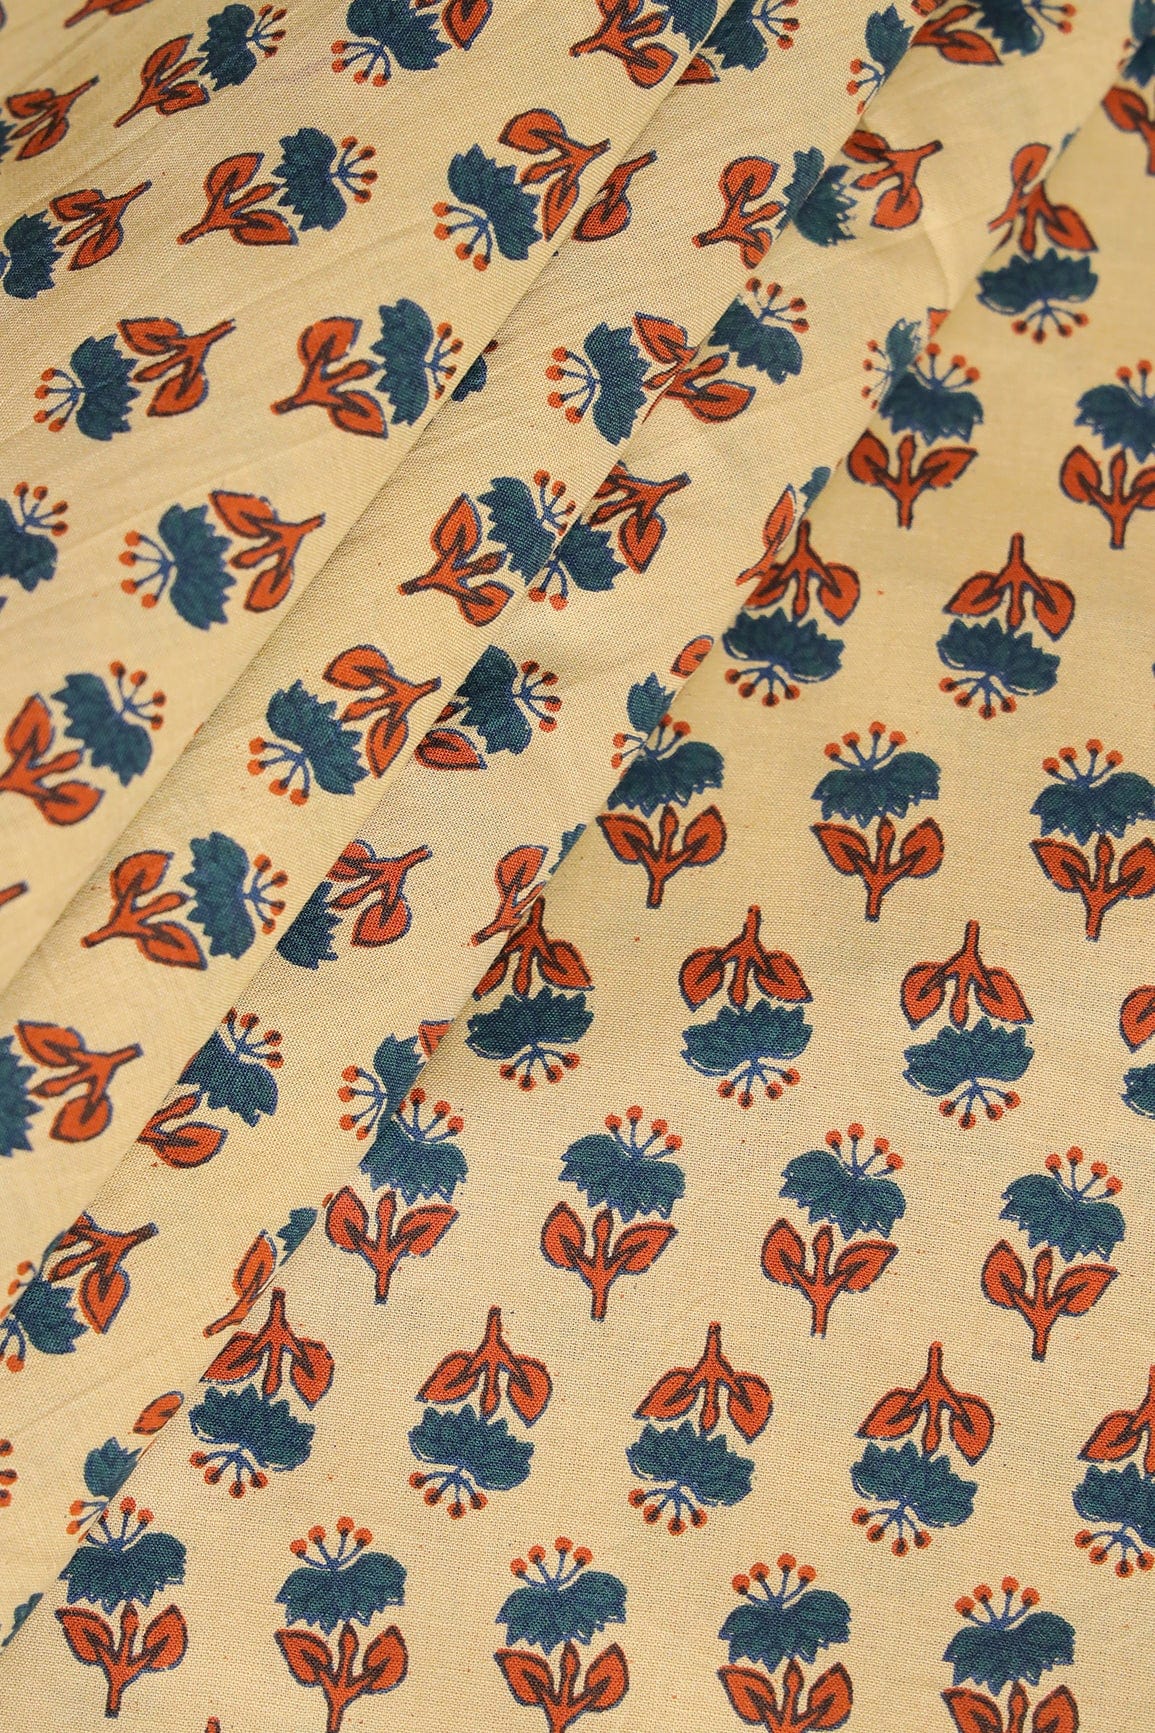 doeraa Prints Brown And Blue Small Floral Booti Pattern Screen Print organic Cotton Fabric